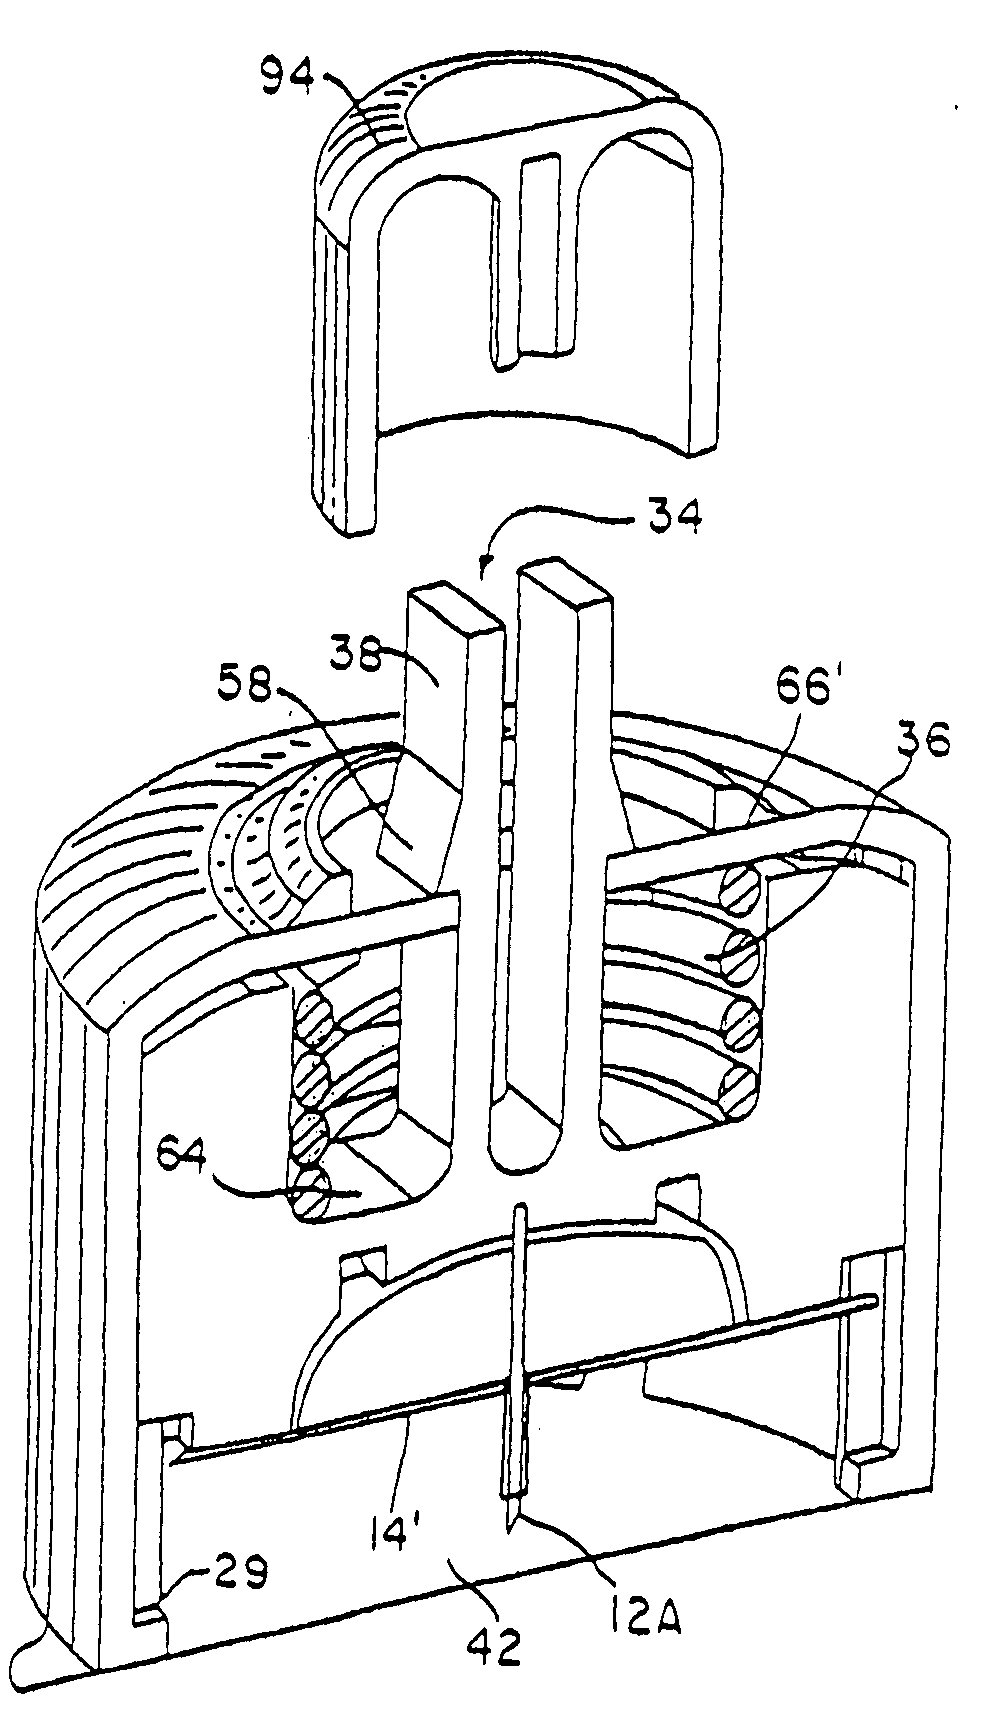 Injector device for placing a subcutaneous infusion set